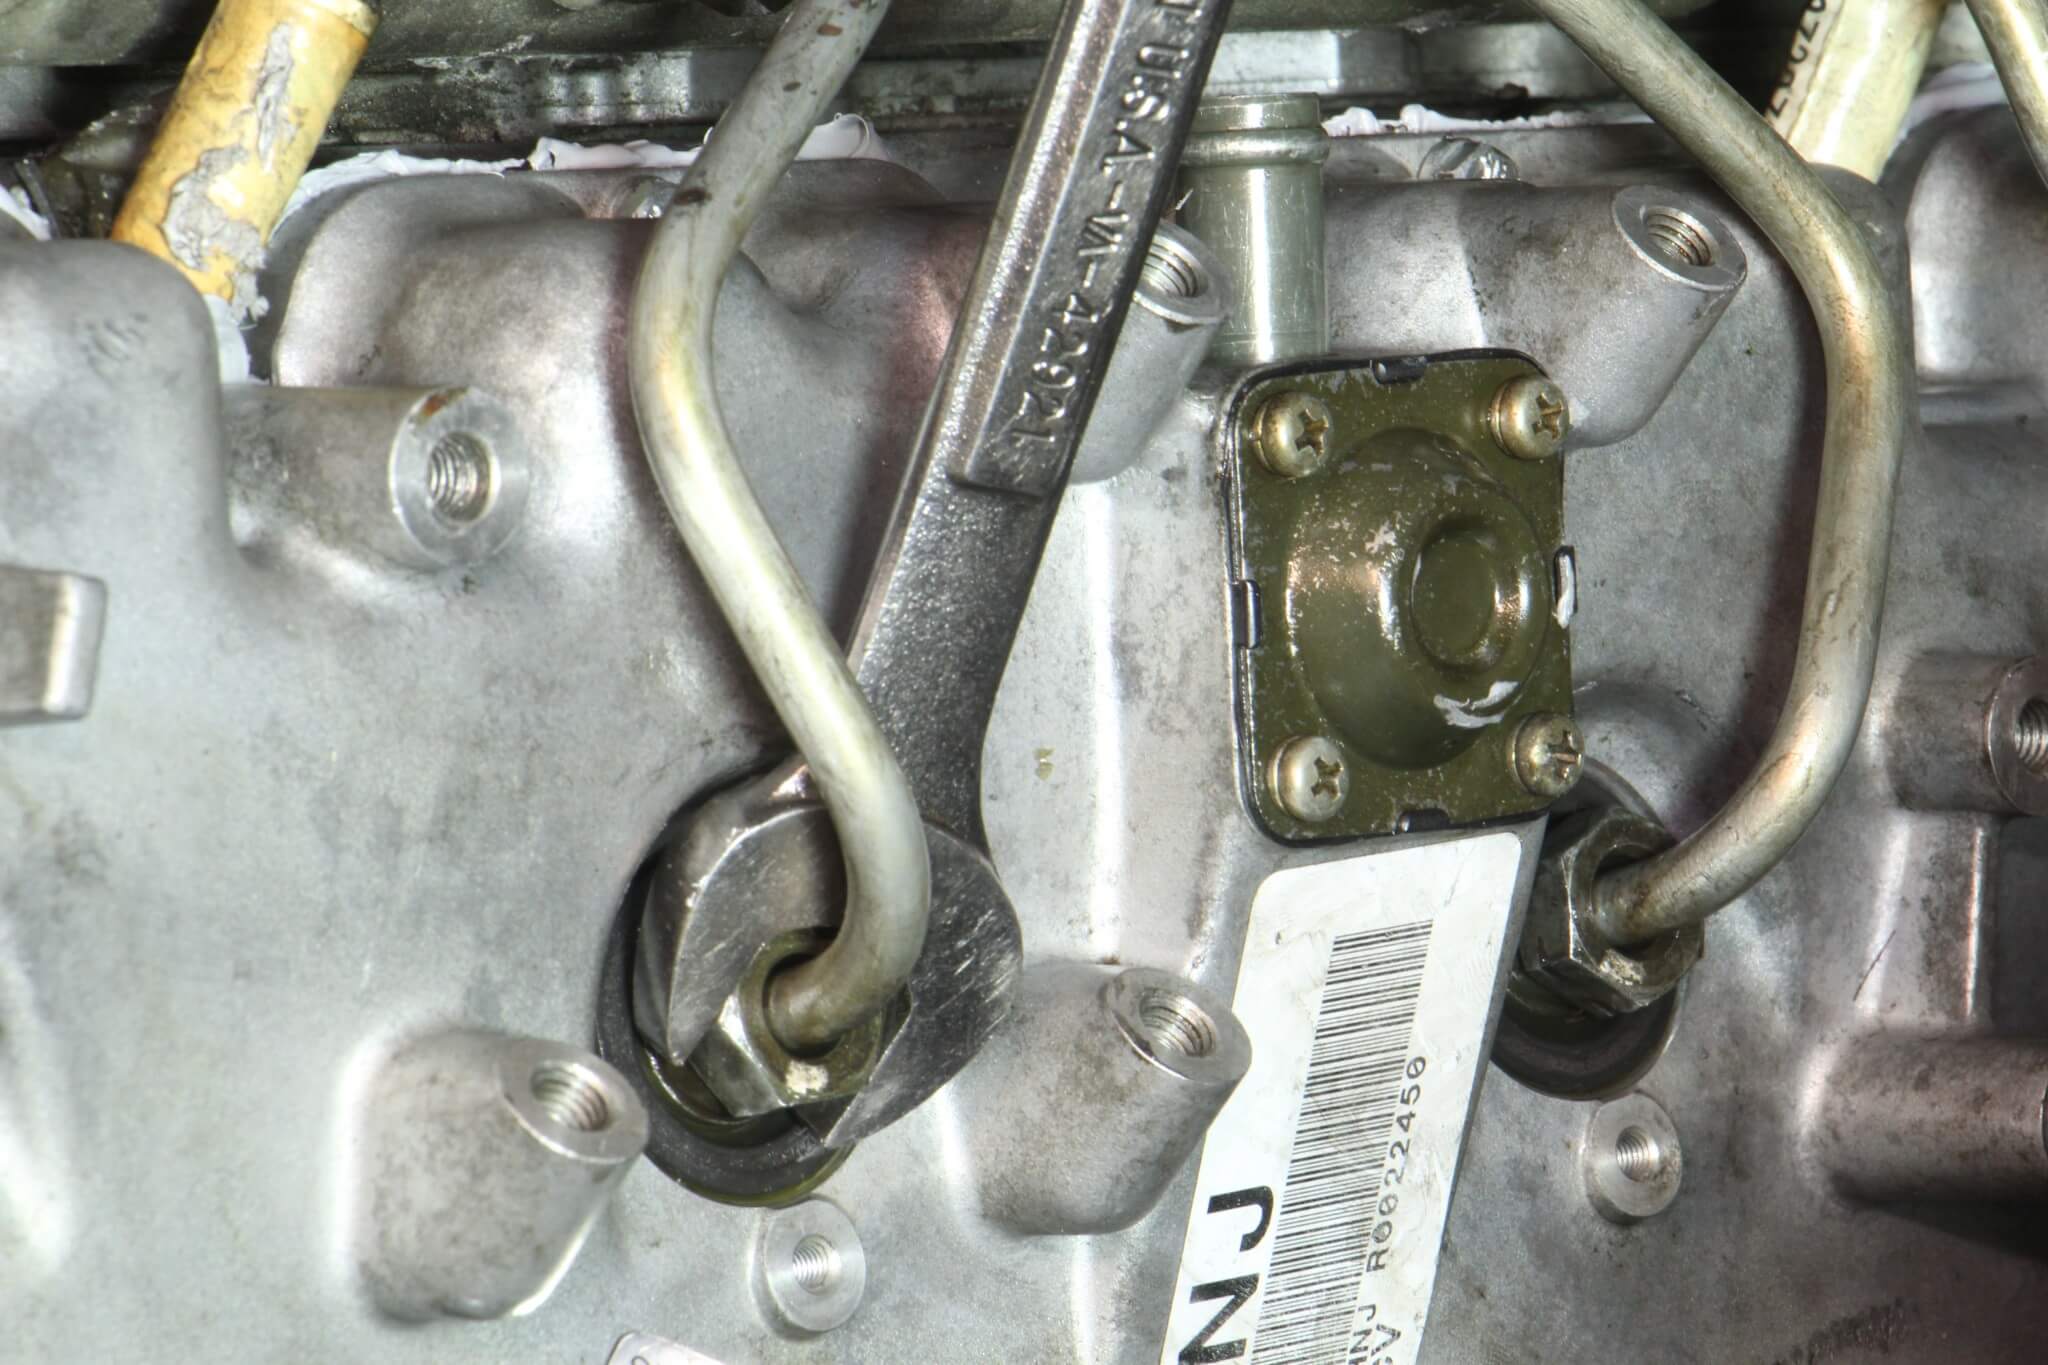 22. A 19mm open wrench was used to snug up and tighten the fuel line fittings. Always start tightening the fuel line from the injector side first, and then the fuel rail fittings.